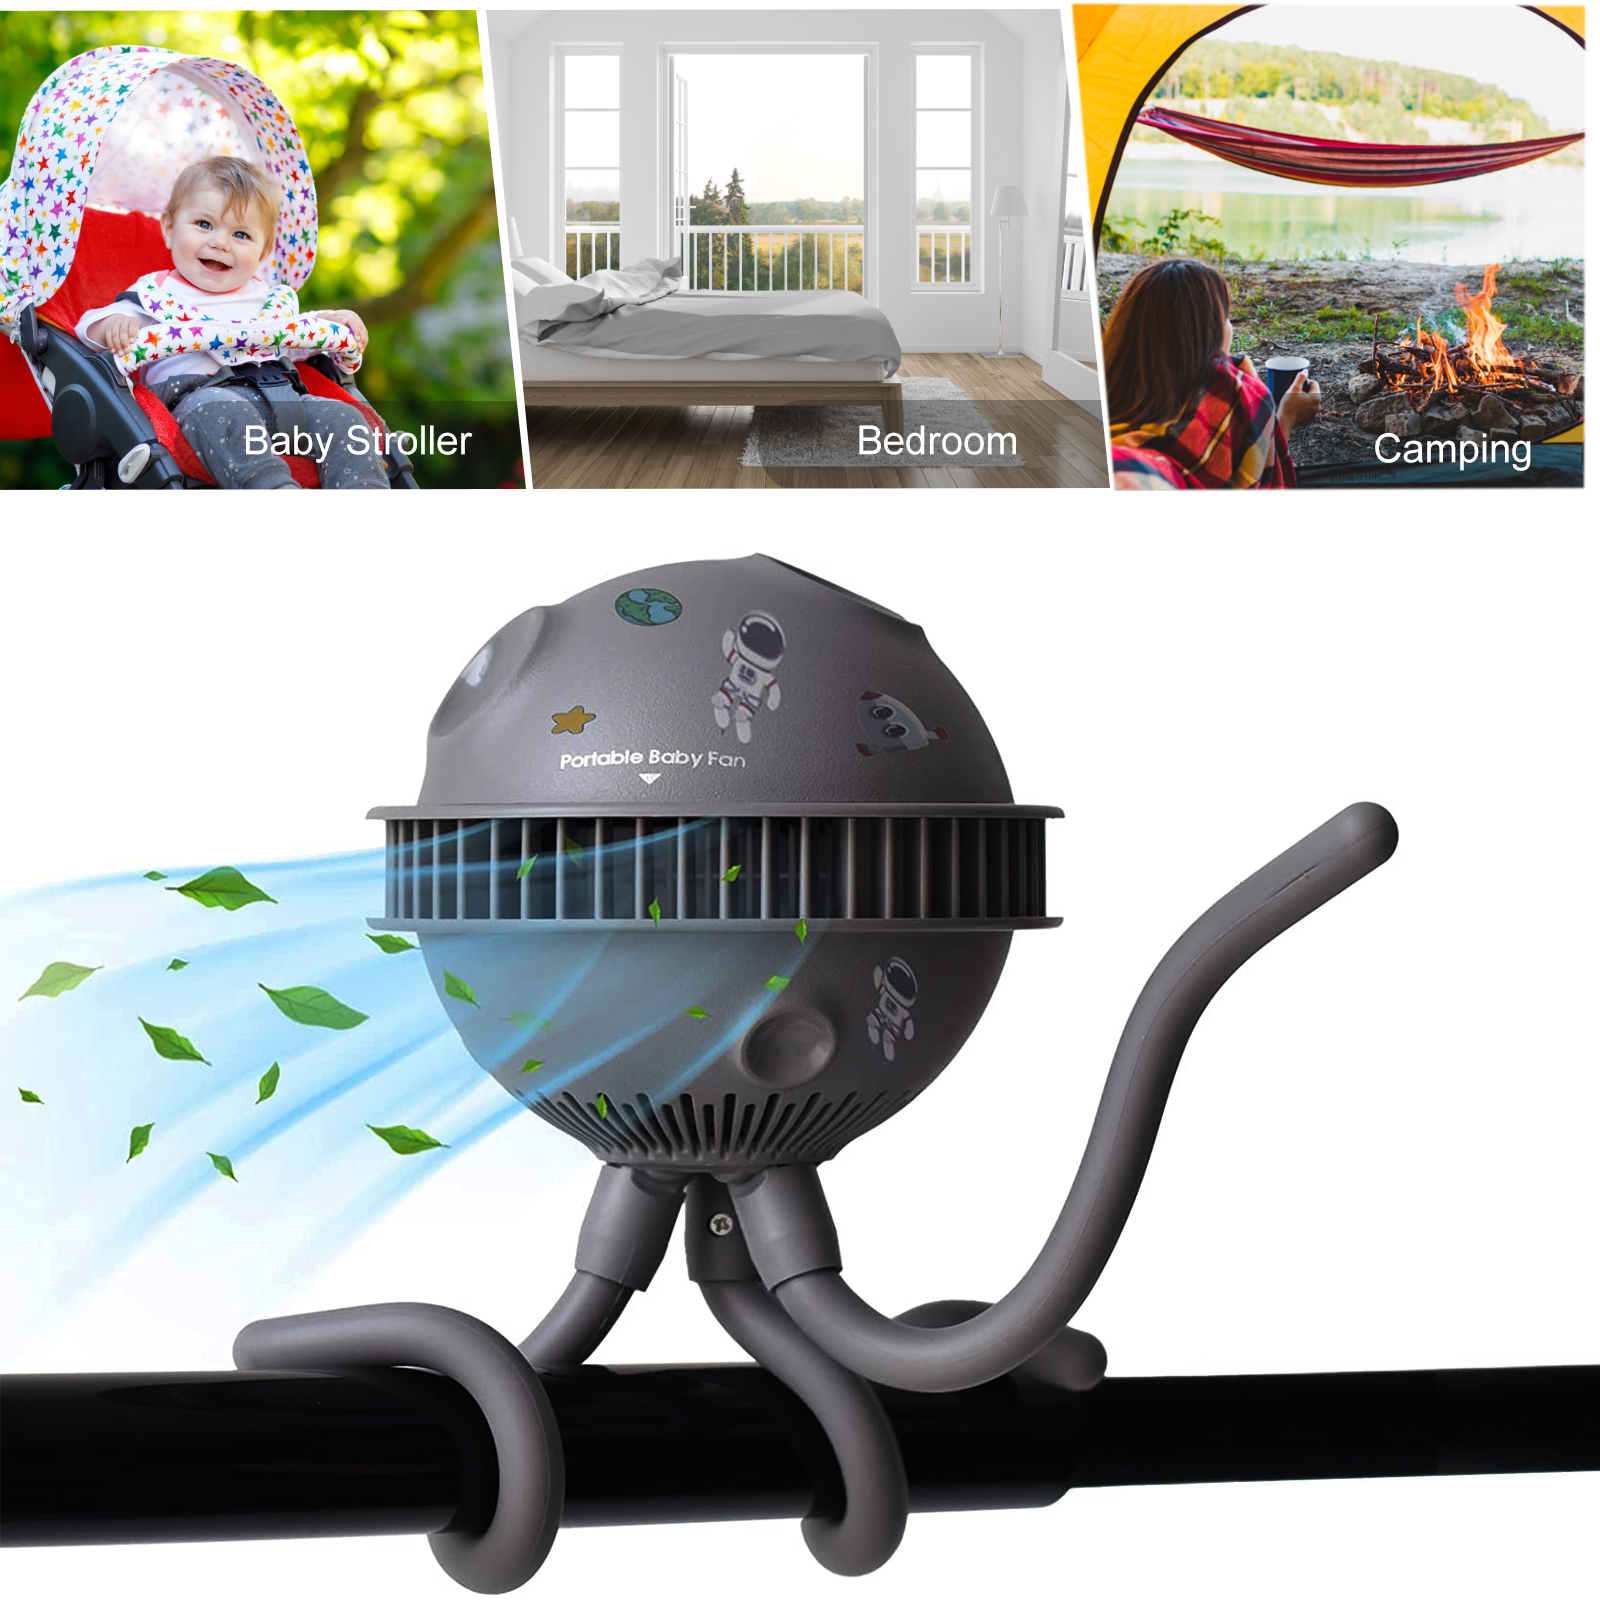 1200 mAh USB Charging Cartoon Clip Fan 4 Speeds Adjustable Portable Baby Stroller Bladeless Fan for Baby Baby Cart Use